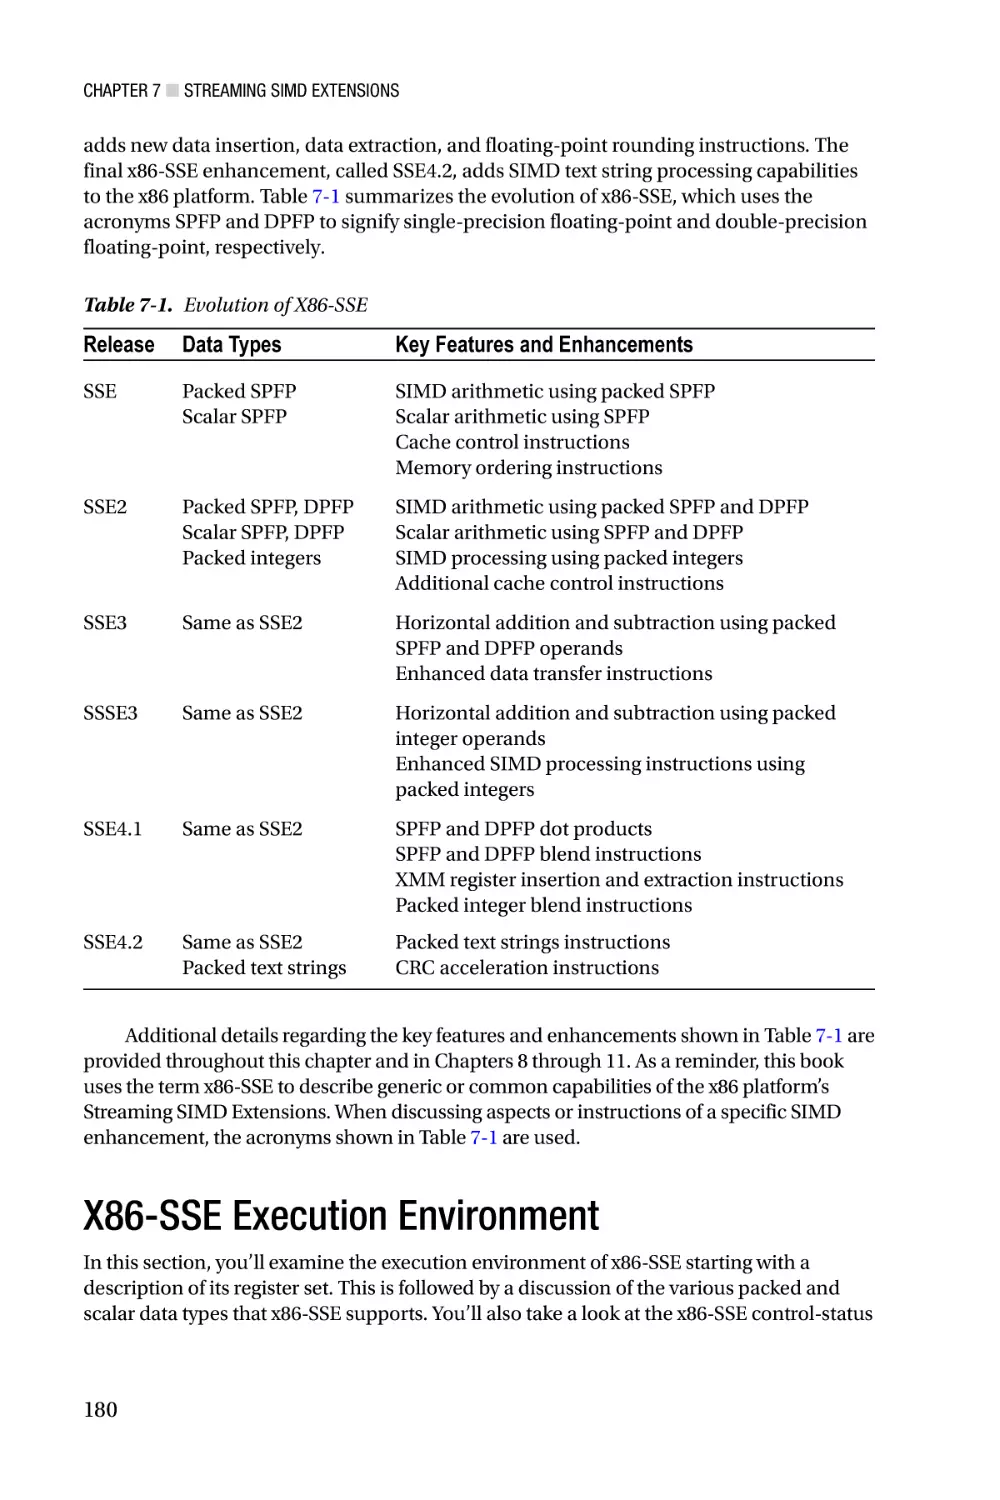 X86-SSE Execution Environment